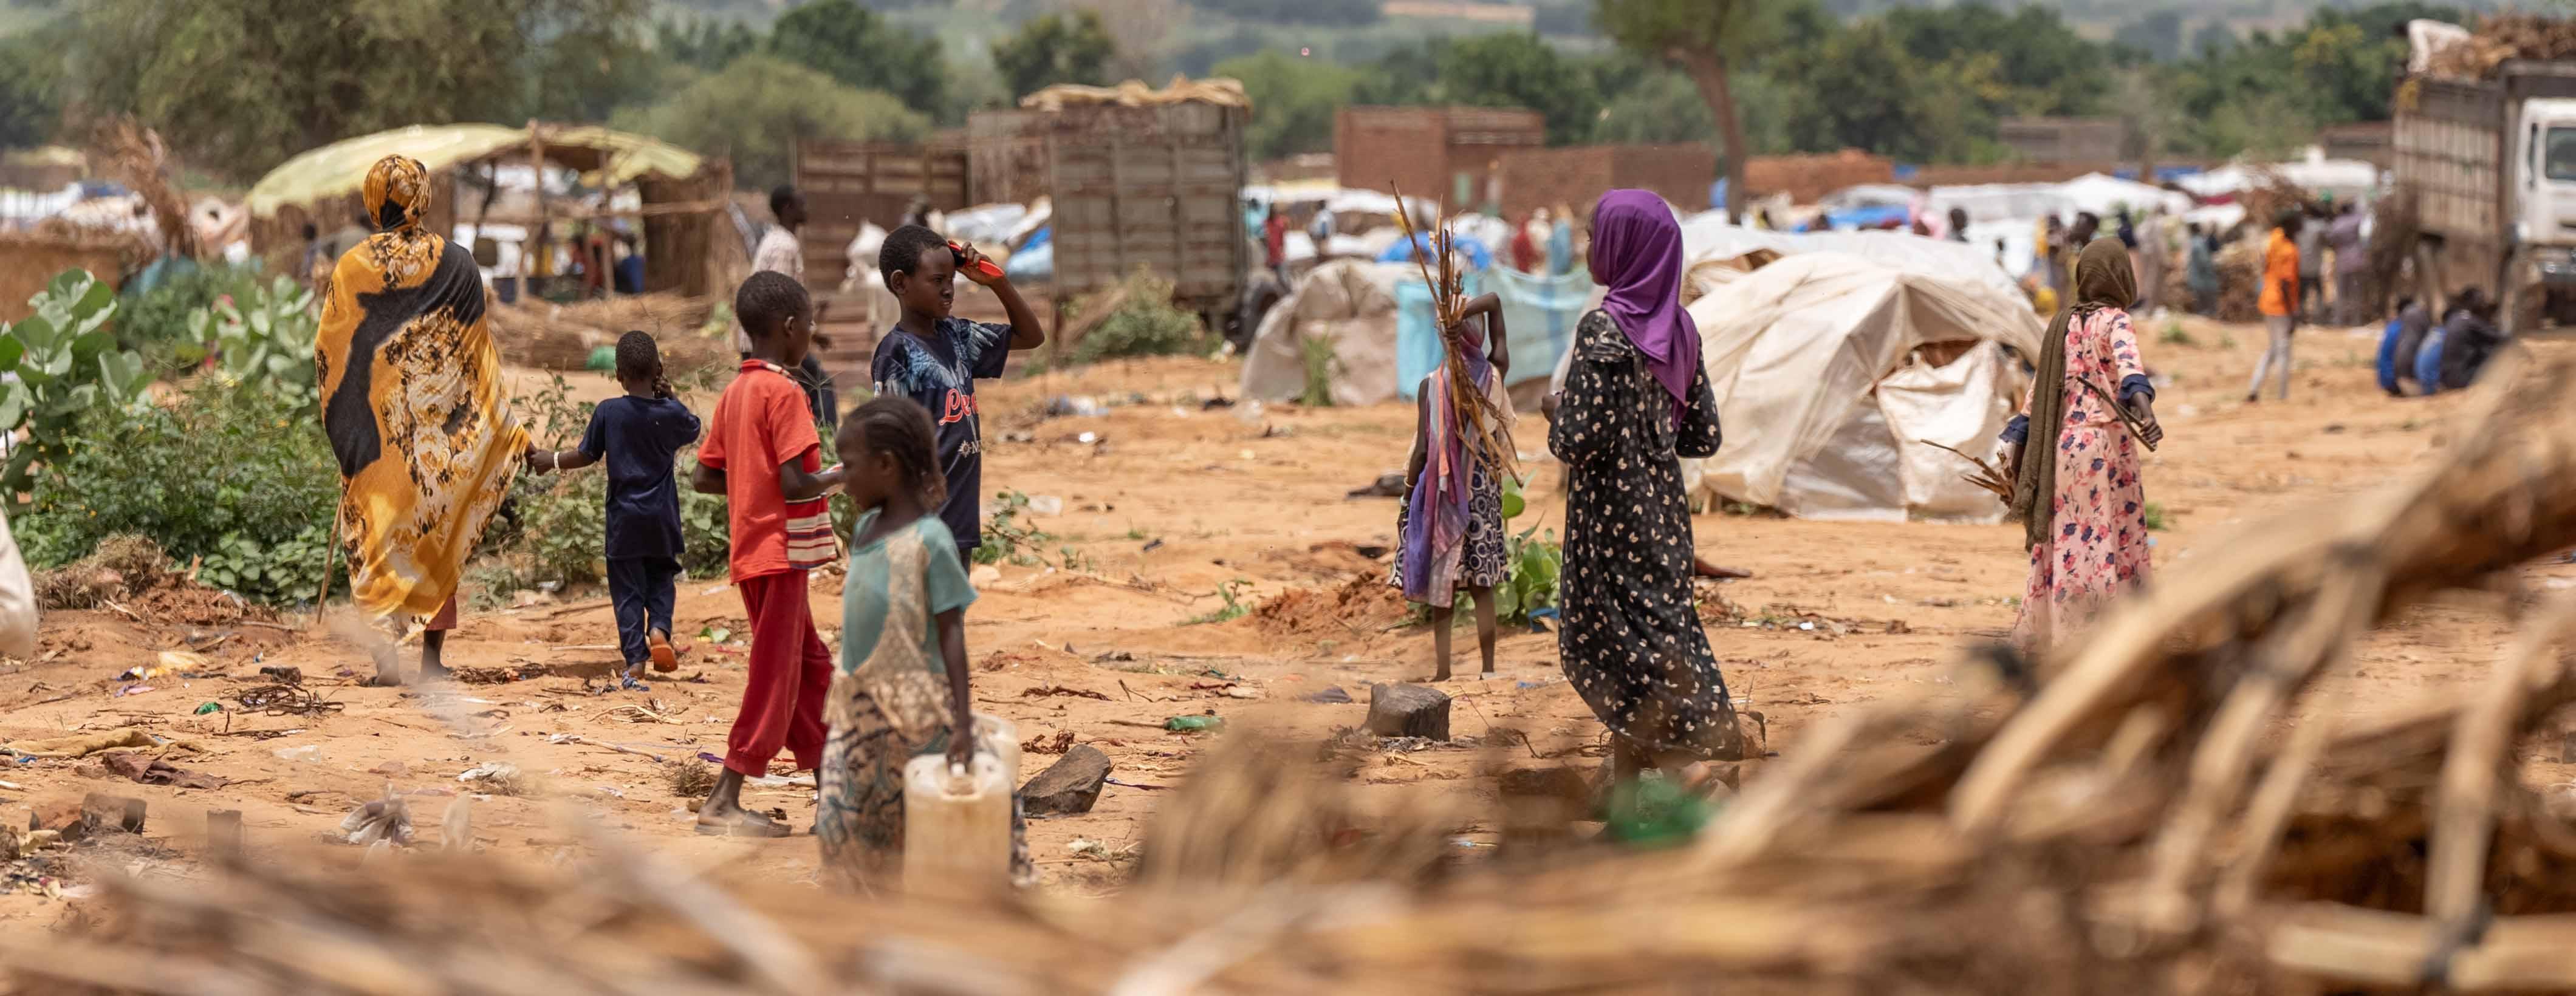 MSF appeals for immediate response to Sudanese refugee crisis in Chad 